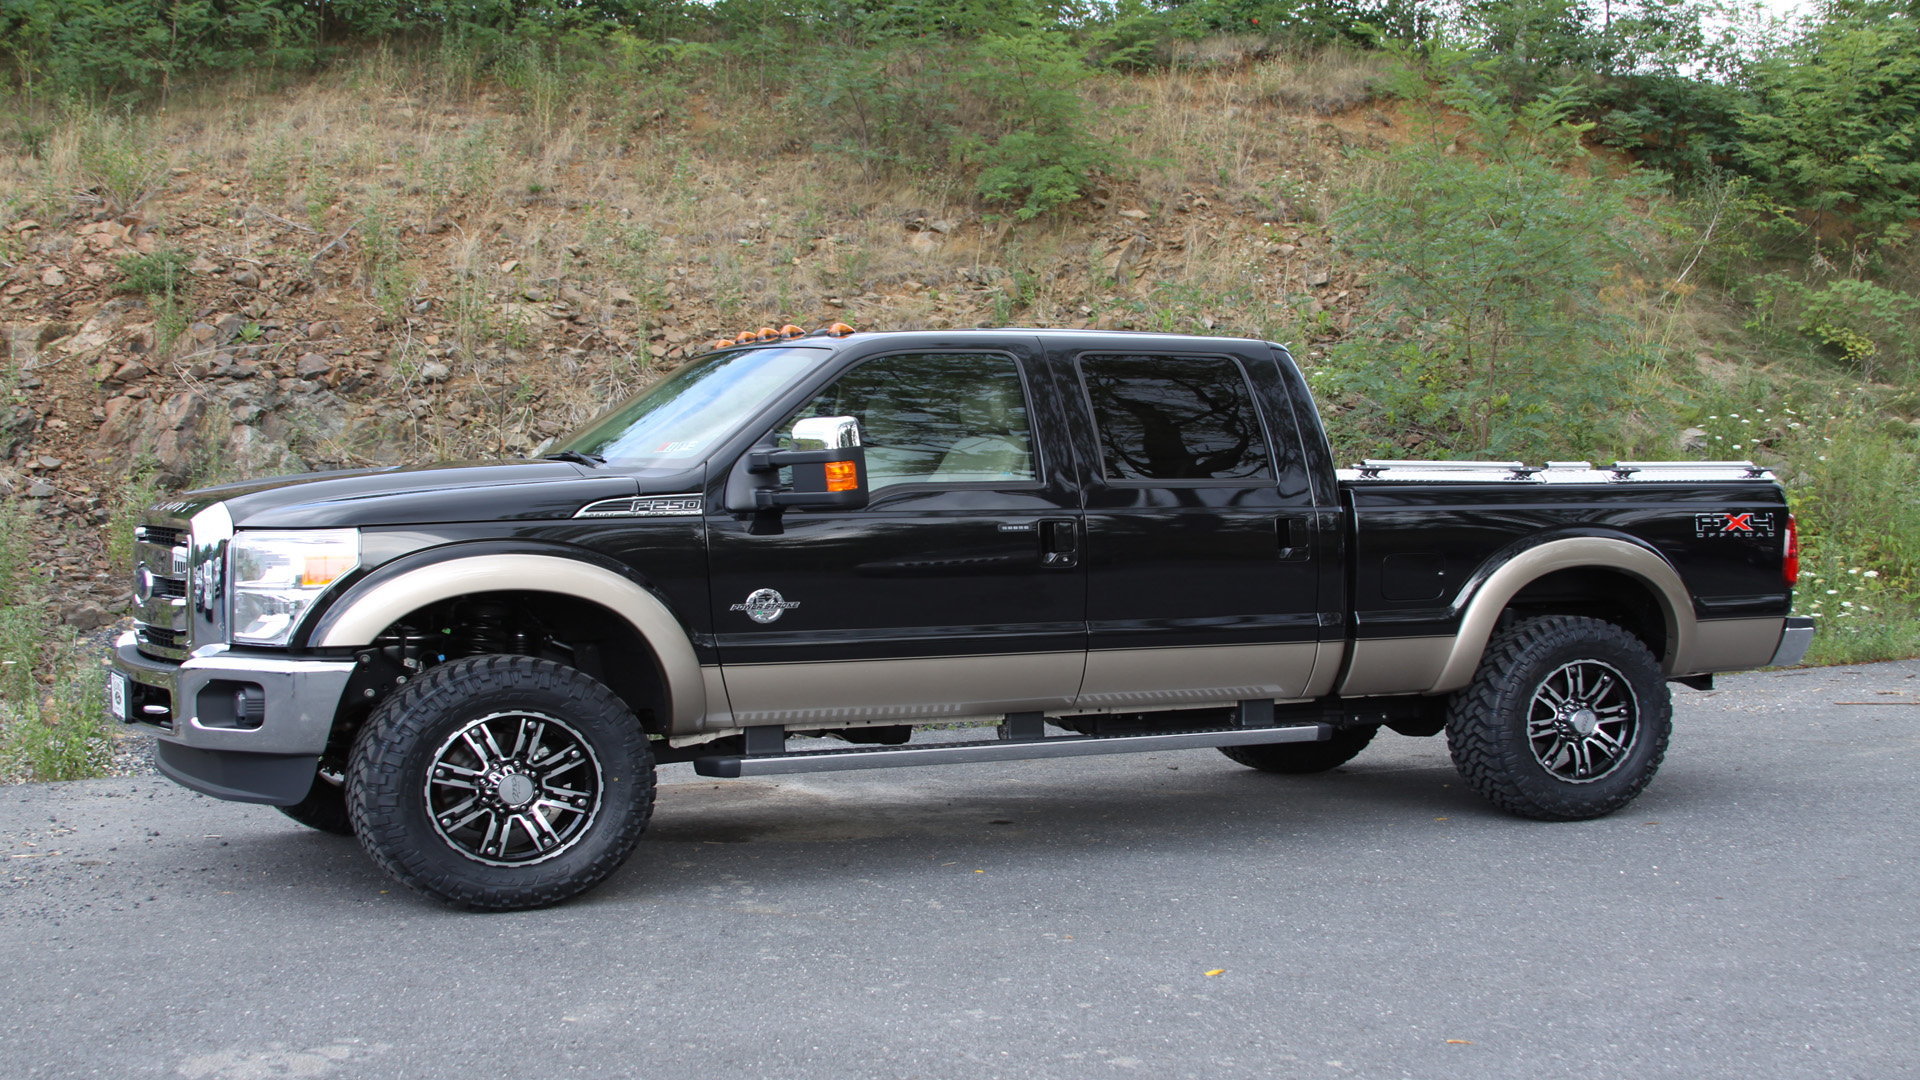 Uncovering Issues: Complaints with the 2014 Ford F250 Super Duty